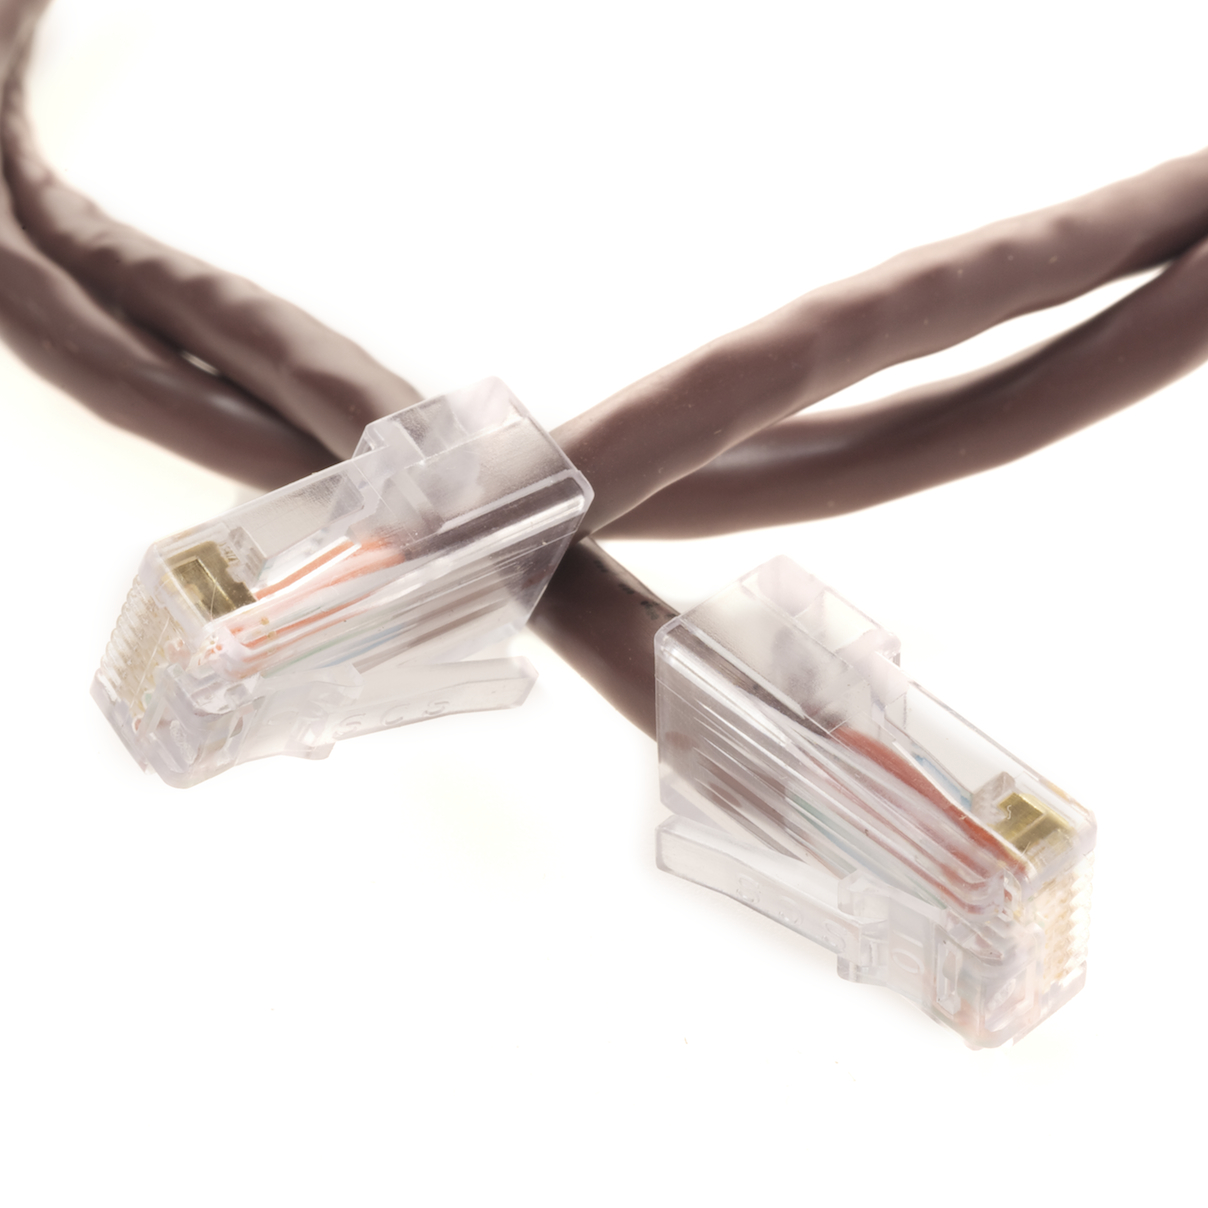 Network Patch Cables in Fall Colors